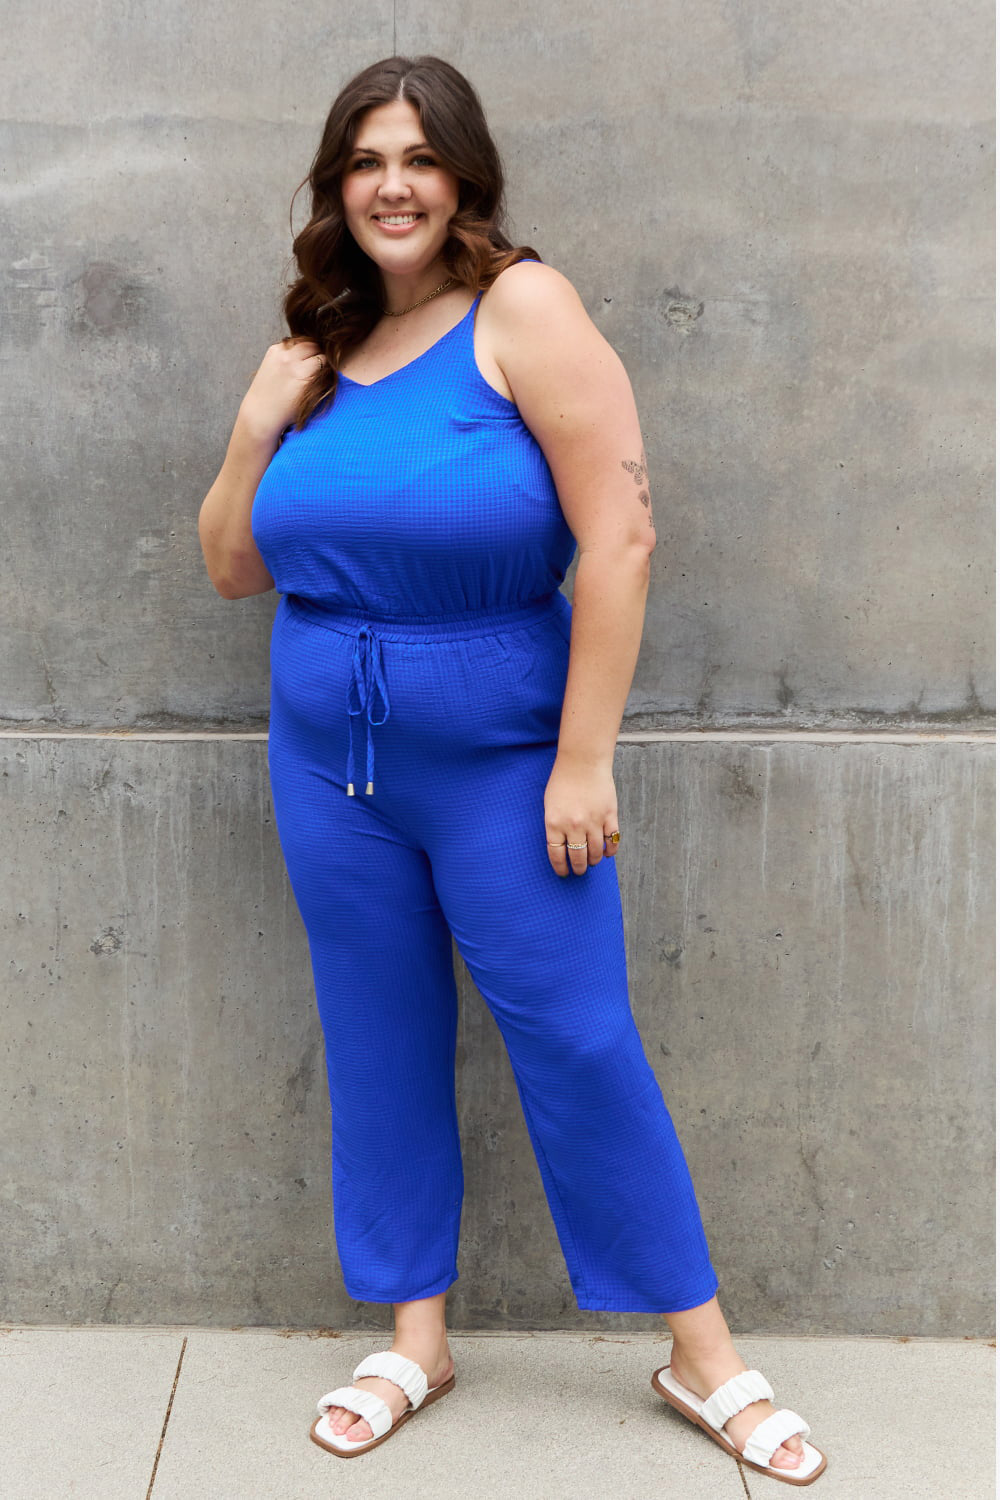 ODDI Textured Woven Jumpsuit in Royal Blue - Online Only